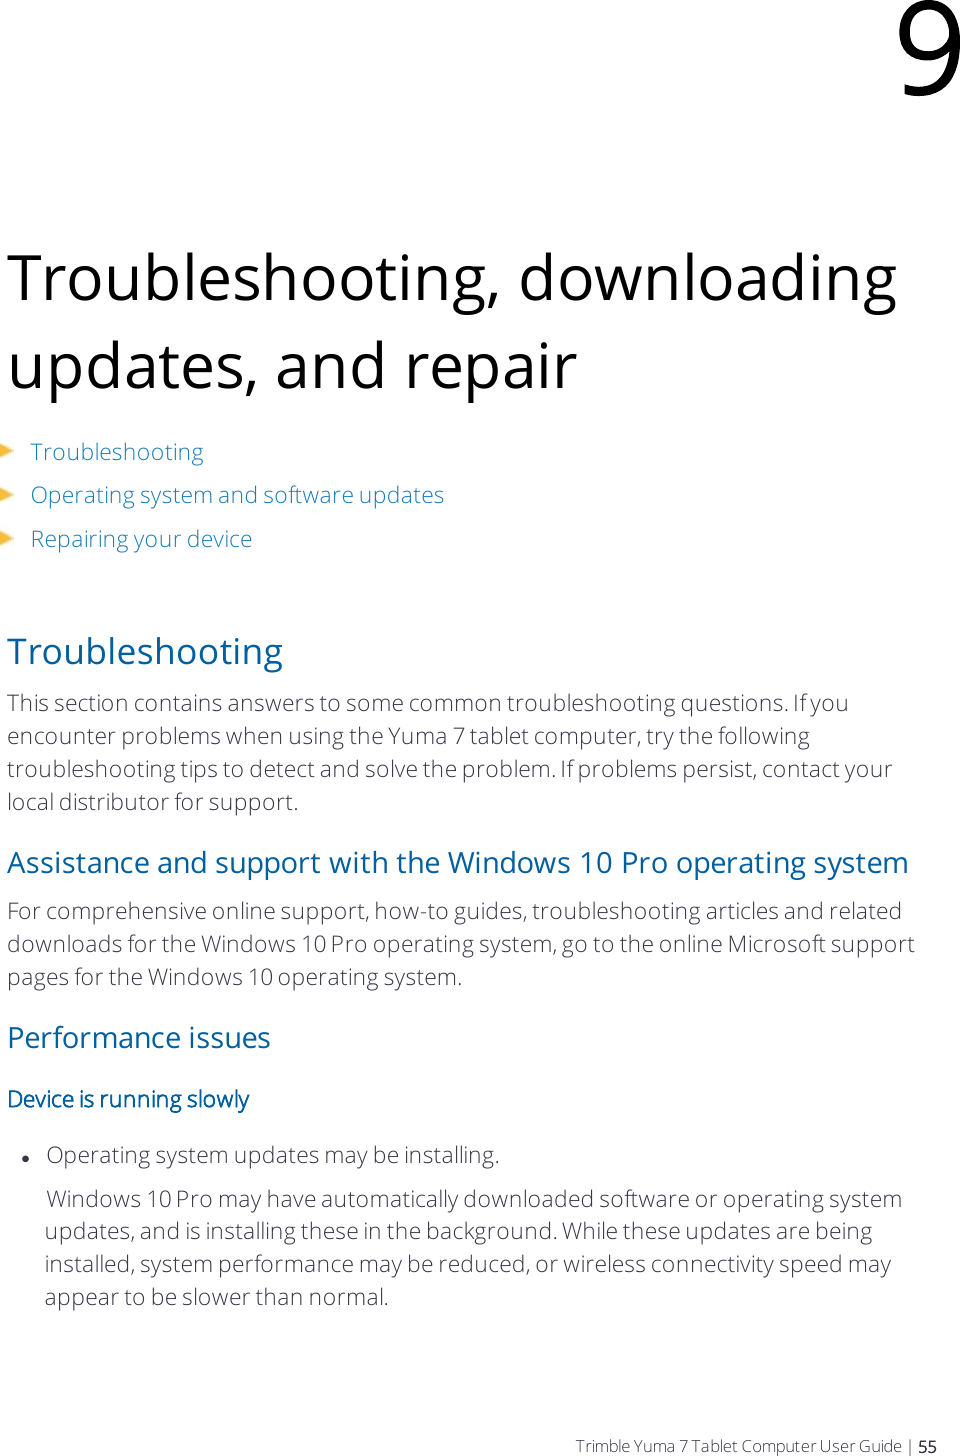 Troubleshooting, downloading updates, and repairTroubleshootingOperating system and software updatesRepairing your deviceTroubleshootingThis section contains answers to some common troubleshooting questions. If you encounter problems when using the  Yuma 7 tablet computer, try the following troubleshooting tips to detect and solve the problem. If problems persist, contact your local distributor for support.Assistance and support with the Windows 10 Pro operating systemFor comprehensive online support, how-to guides, troubleshooting articles and related downloads for the Windows 10 Pro operating system, go to the online Microsoft support pages for the Windows 10 operating system.Performance issuesDevice is running slowlylOperating system updates may be installing.    Windows 10 Pro may have automatically downloaded software or operating system updates, and is installing these in the background. While these updates are being installed, system performance may be reduced, or wireless connectivity speed may appear to be slower than normal.9Trimble Yuma 7 Tablet Computer User Guide | 55